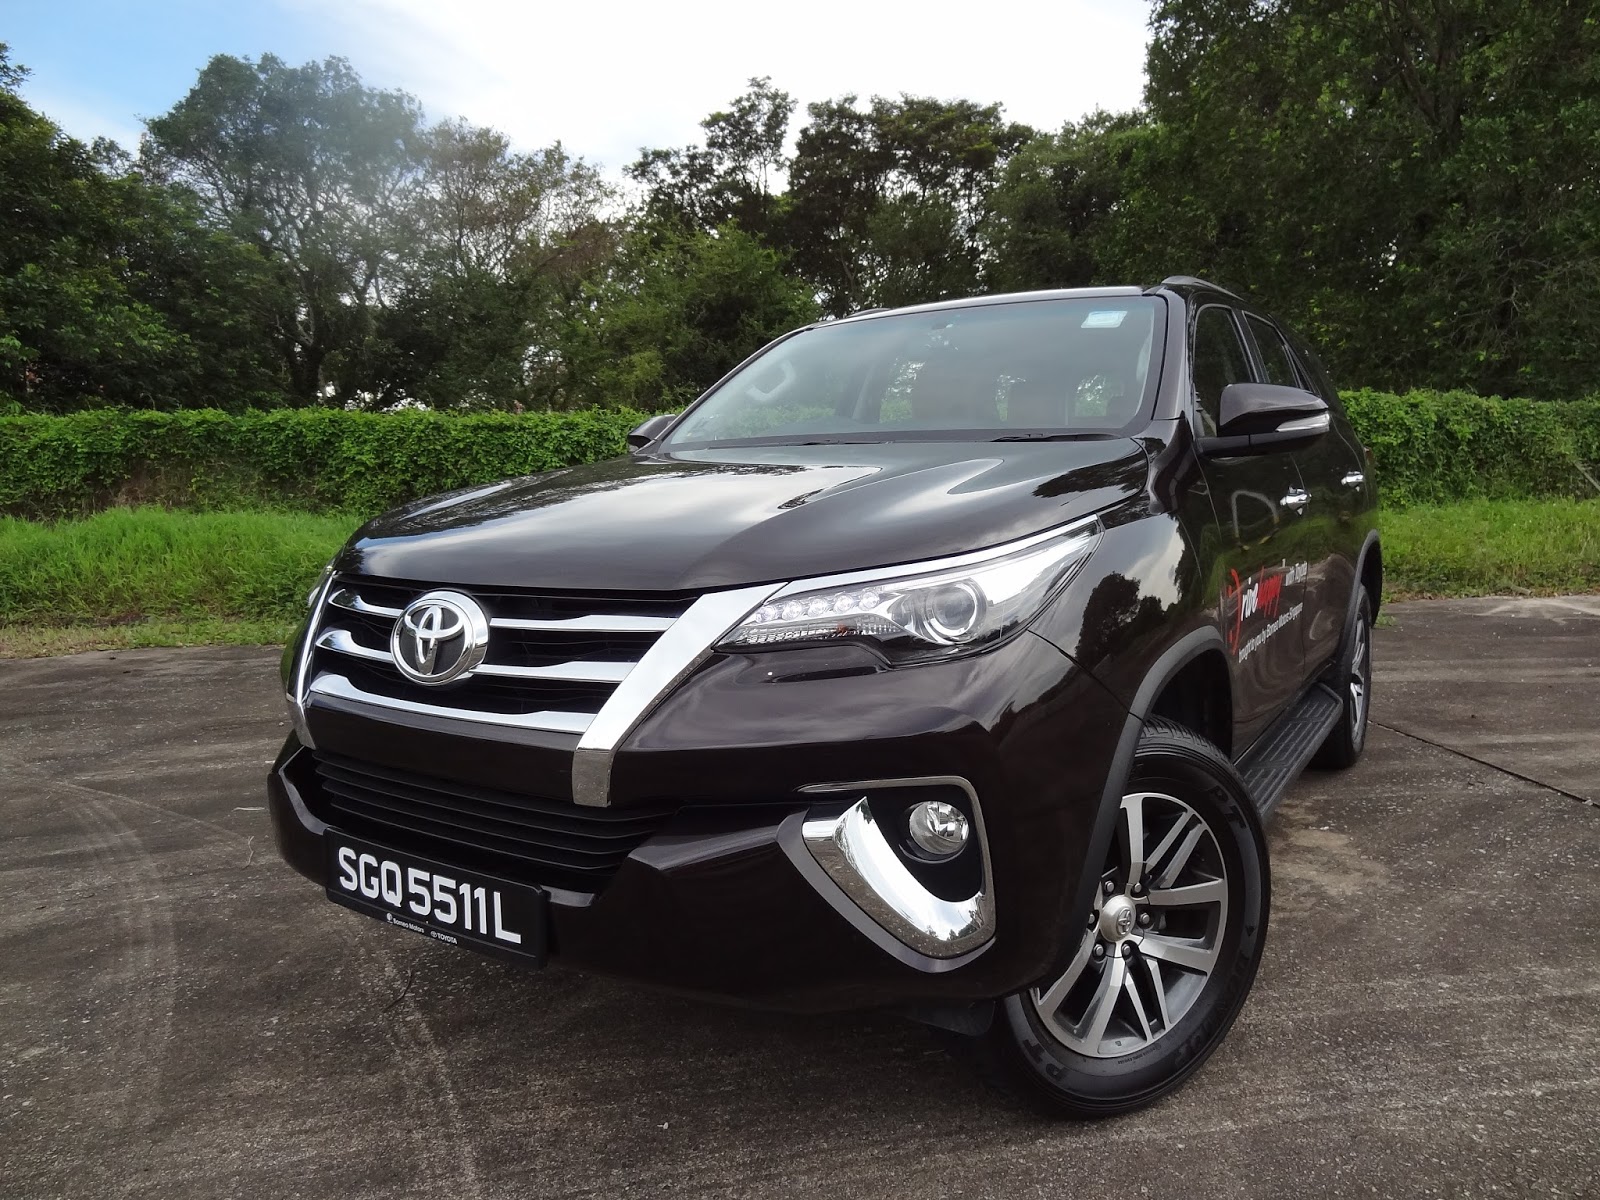 Shaun Owyeong: All New 2016 Toyota Fortuner 2.7L [Car Review]